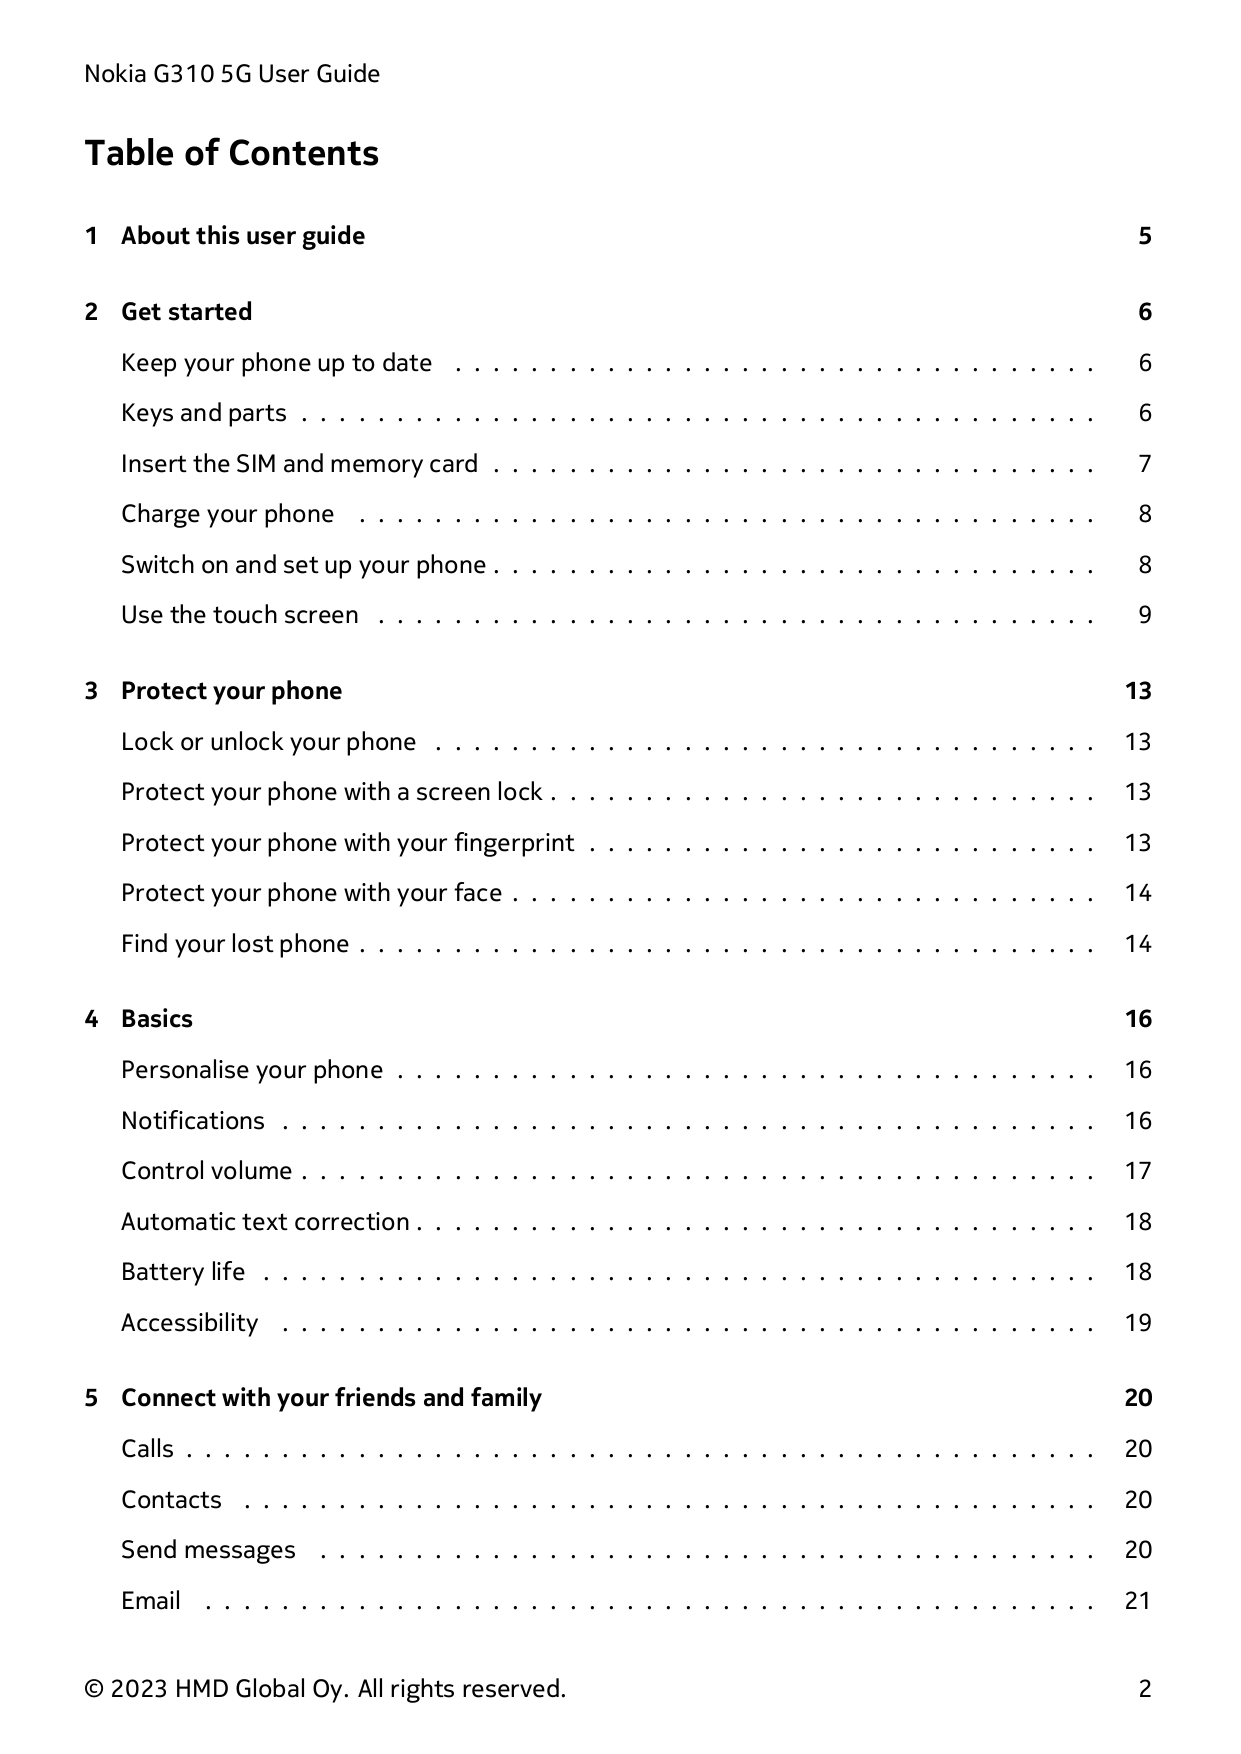 Nokia G310 5G User GuideTable of Contents1 About this user guide52 Get started6Keep your phone up to date . . . . . . . . . . . 